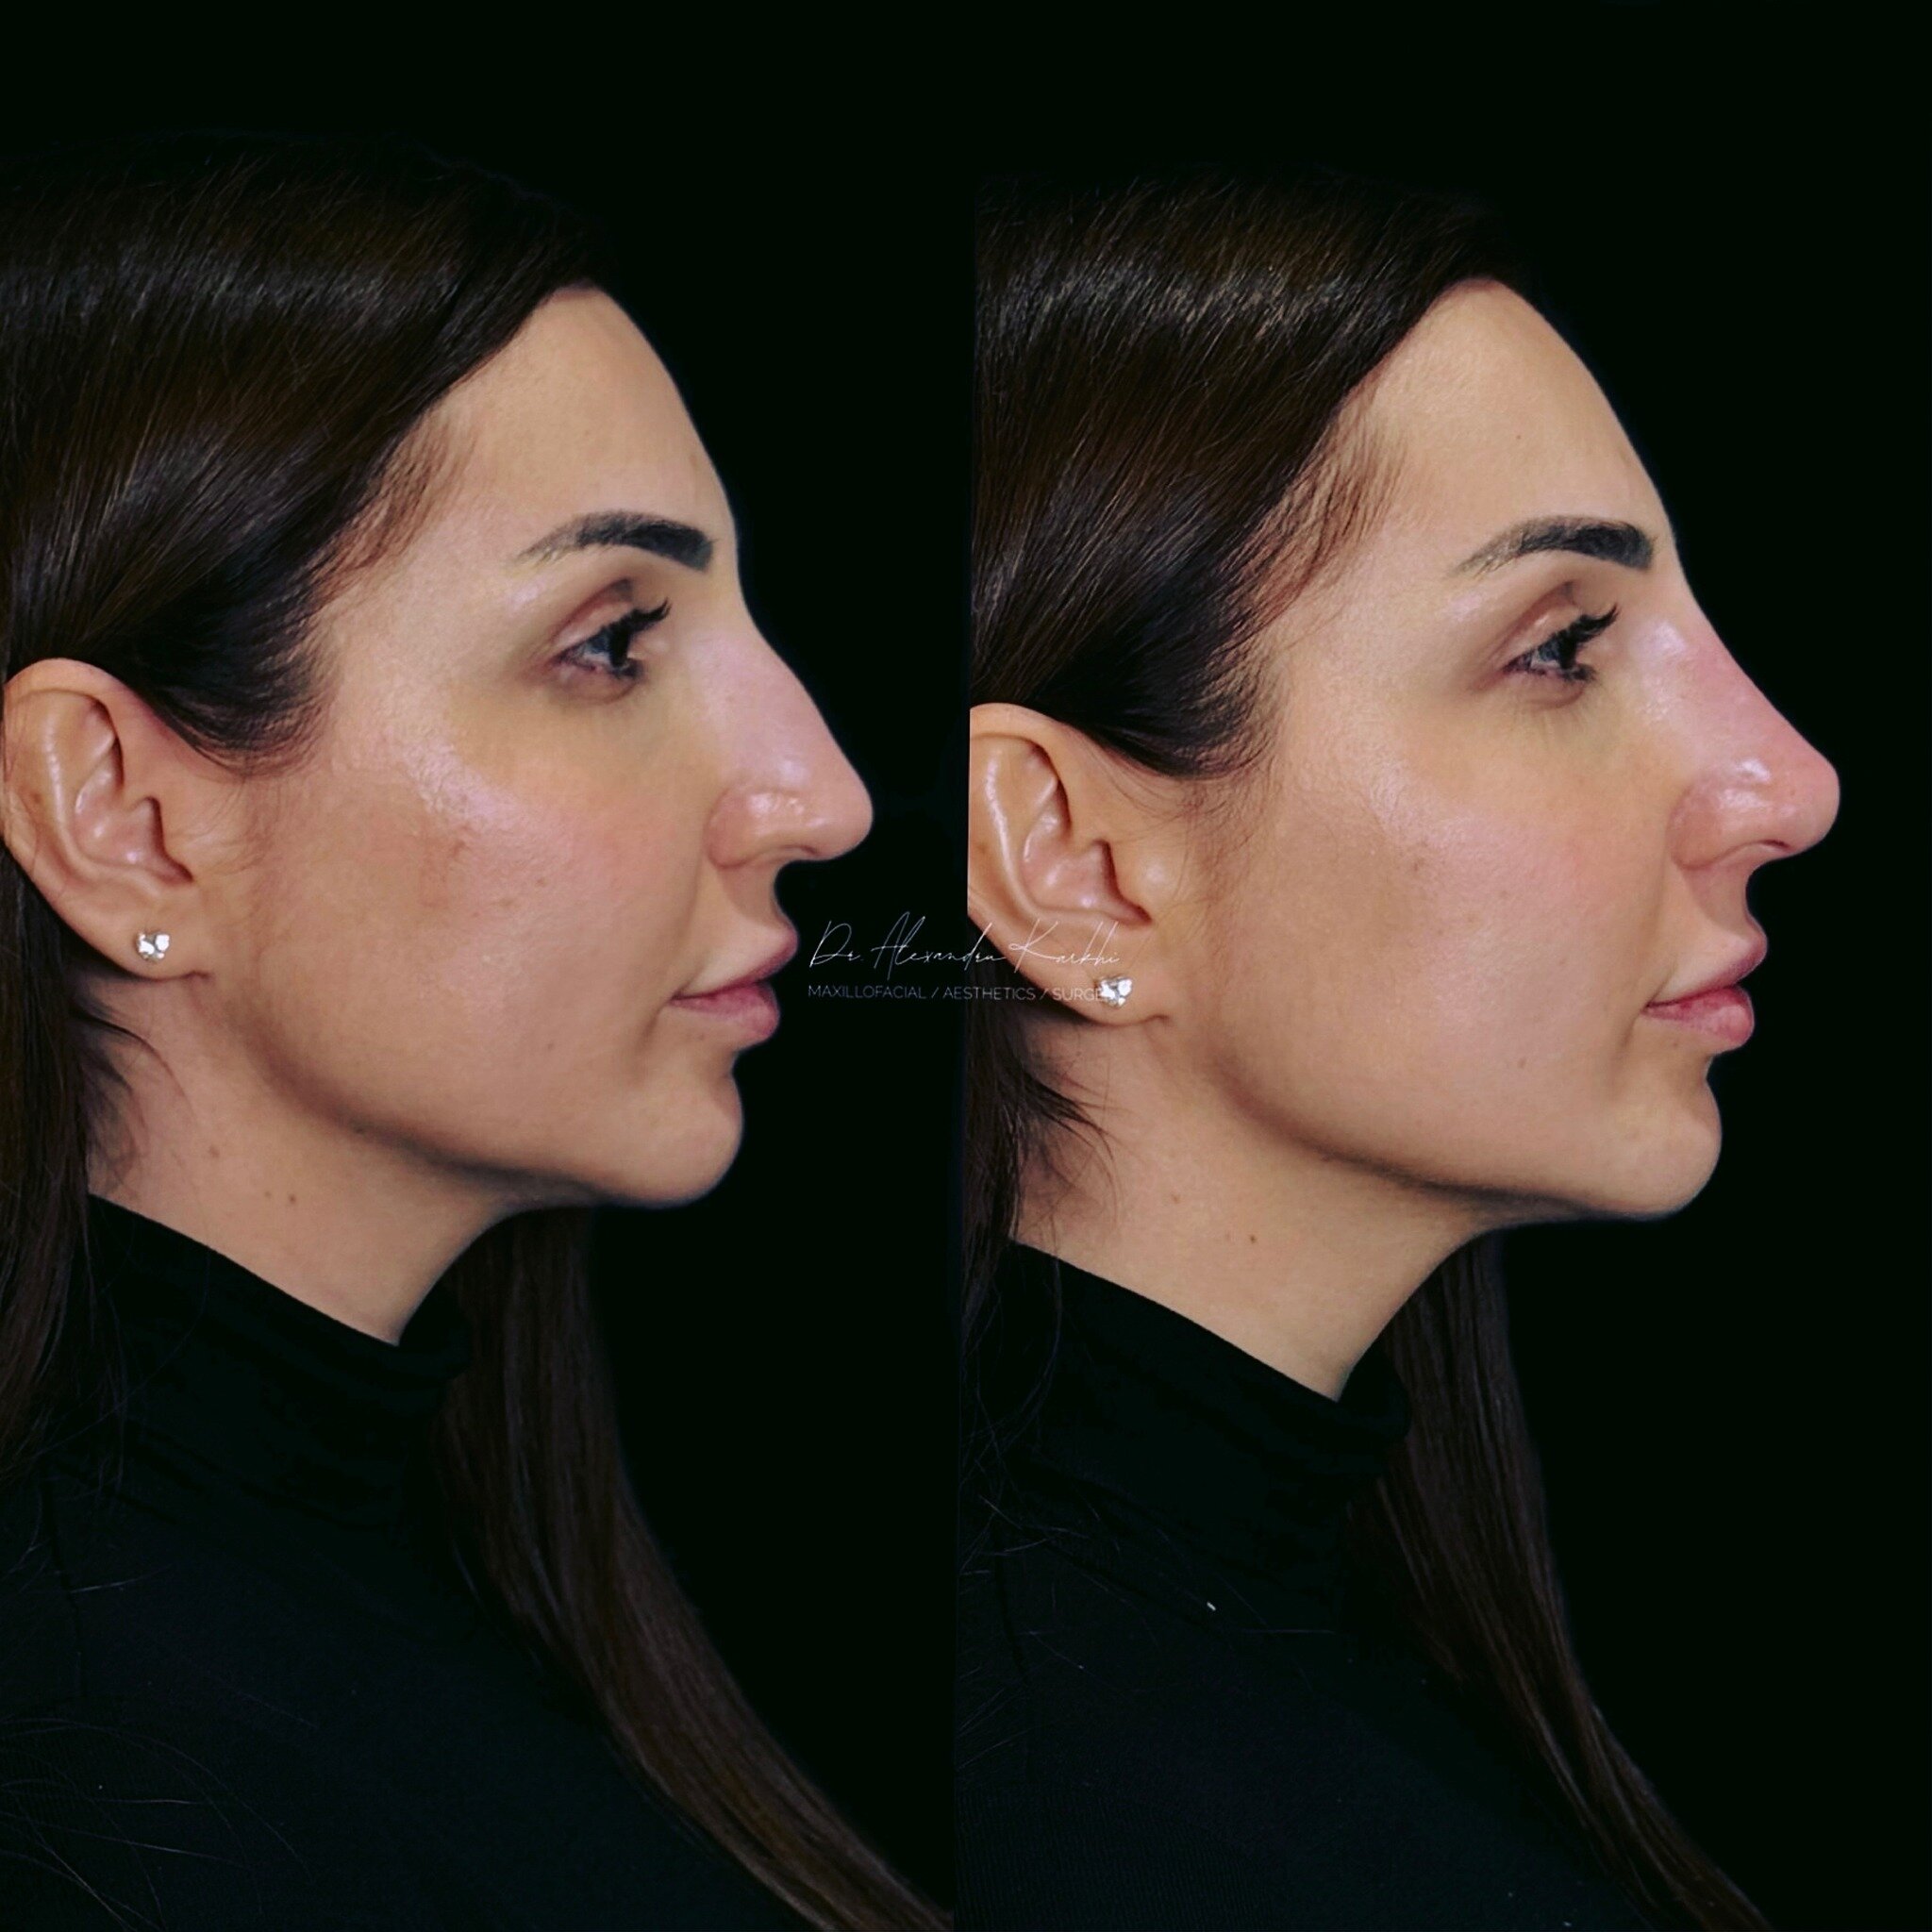 DR.K&rsquo;s Nose reshaping with dermal fillers is created for patients who need minor nasal remodeling but are not looking for a surgical rhinoplasty
.
Exclusively available at DR.K 👨🏼&zwj;⚕️
.
🎯 Treatment: Medical rhinocorrection based on long l